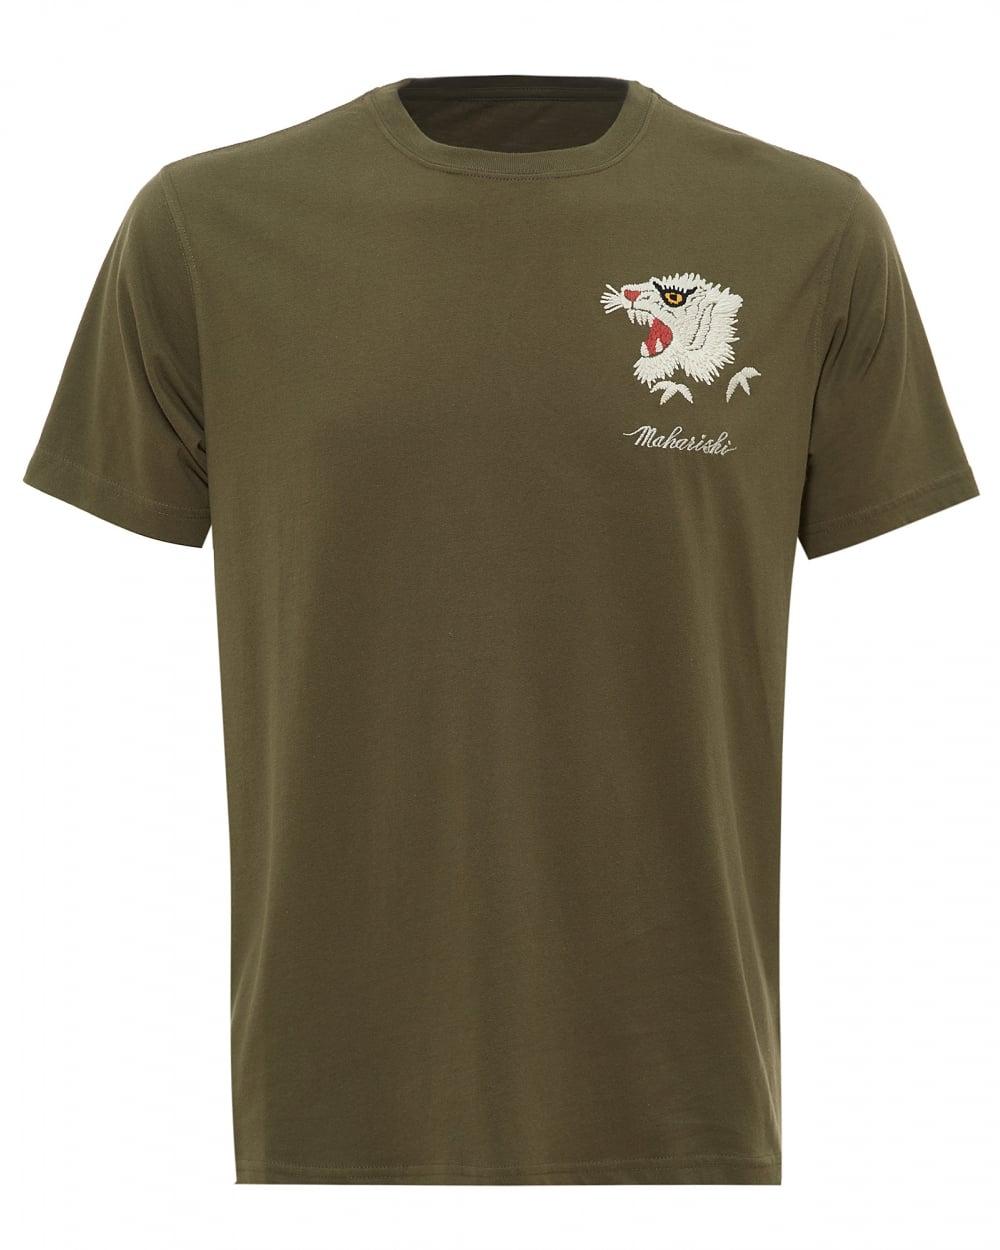 Olive Green and White Logo - Maharishi Mens White Tiger T-Shirt, Embroidered Olive Green Tee